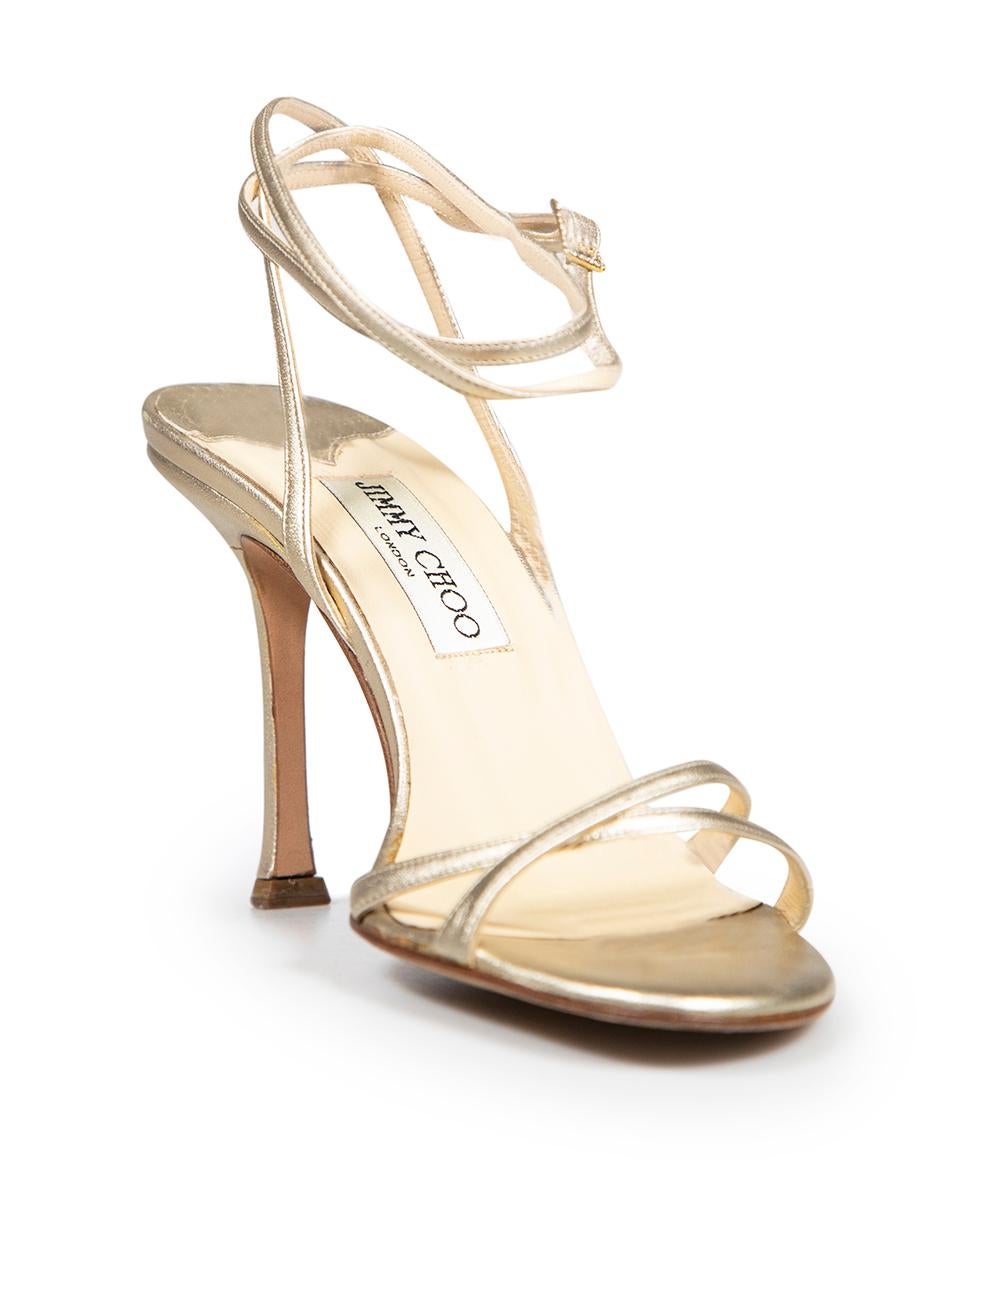 CONDITION is Good. Minor wear to sandals is evident. Light wear to both heels with marks and abrasions to the leather. The right shoe ankle strap has split slightly on this used Jimmy Choo designer resale item. These shoes come with original box.
 
